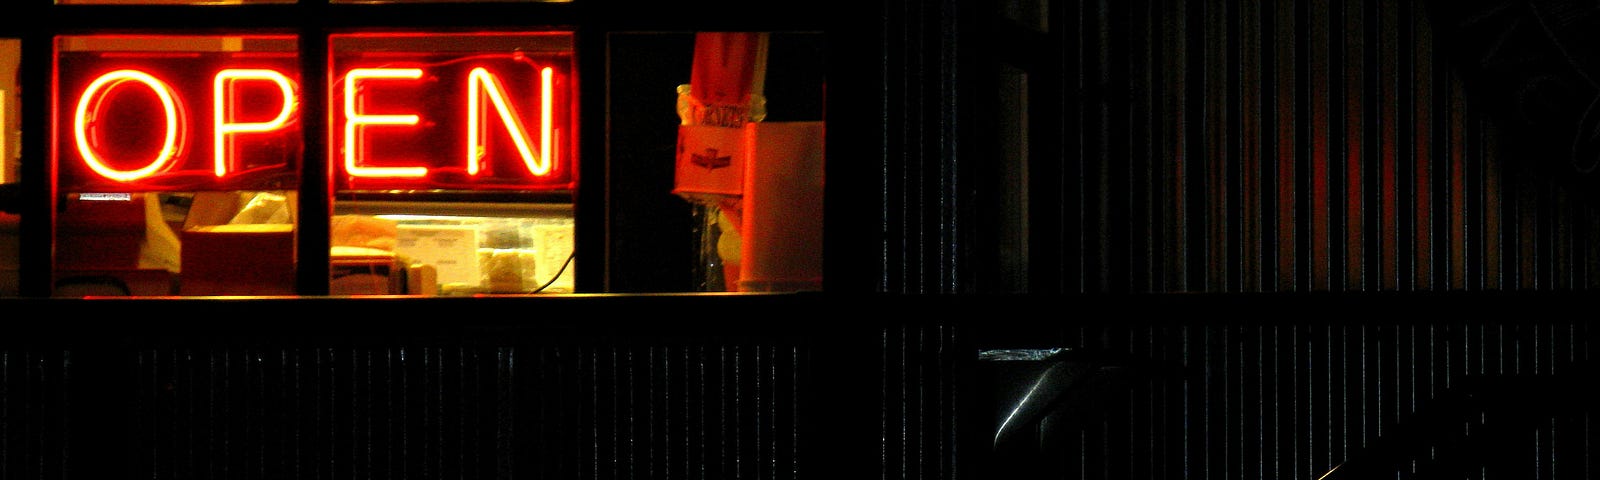 a red neon open sign in the window, its nighttime